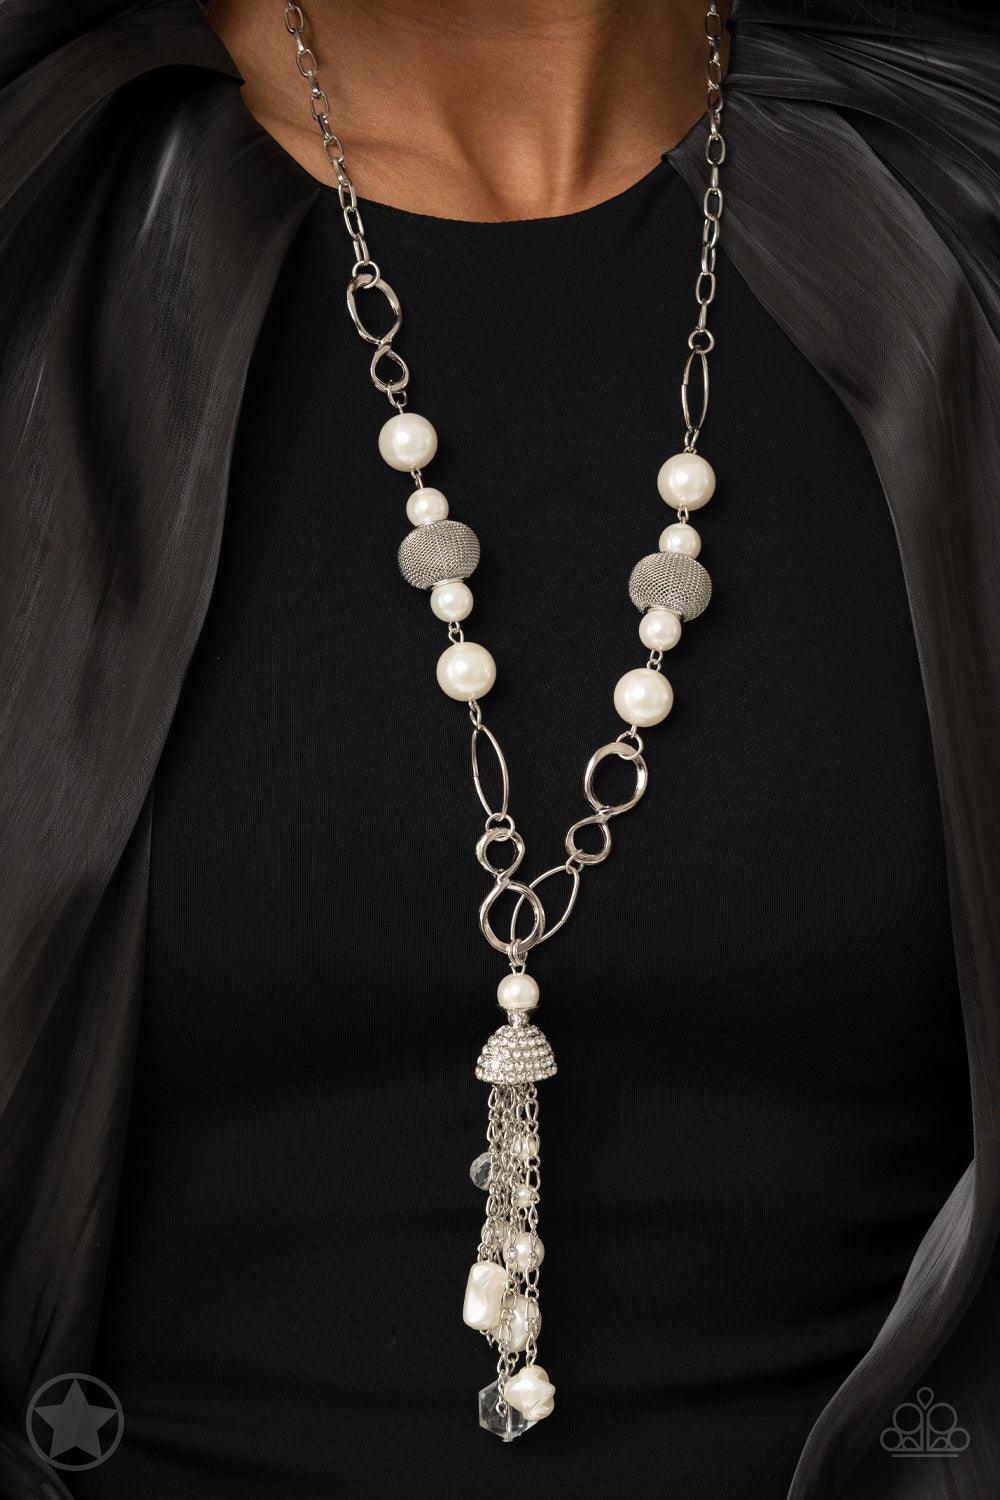 Paparazzi Accessories Designated Diva - White A half-shell studded in rhinestones overhangs a cluster of ivory pearls, tassels of silver chain, and small crystals. Two large wire mesh spheres and larger ivory pearls decorate the neckline. Sold as one indi